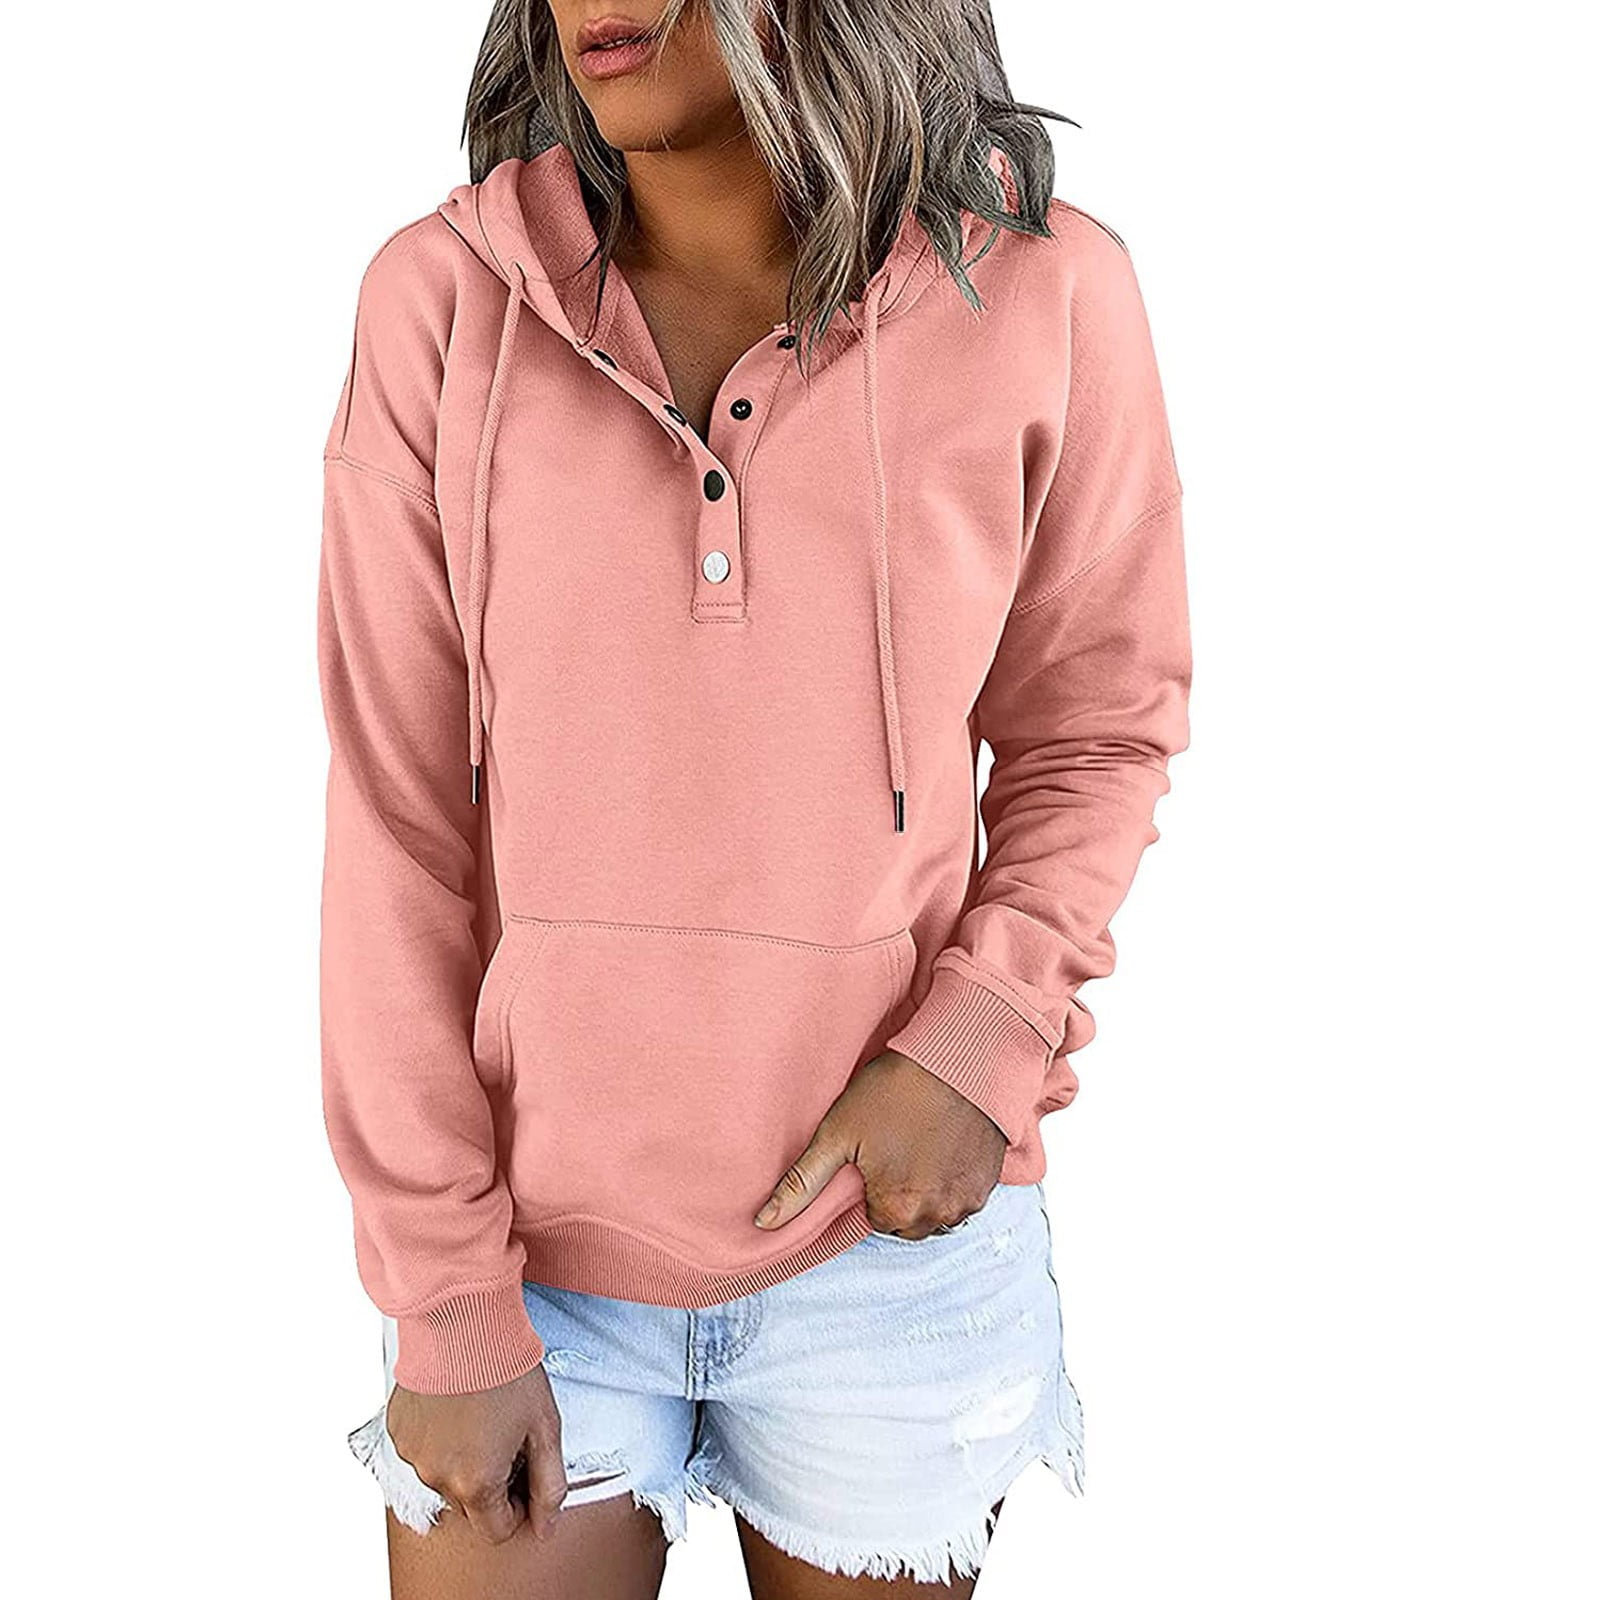 Women's Hoodies with Thumb Holes,Hoodies for Women Long Sleeve Button up  Drawstring Hooded Sweatshirts Casual Solid Color Kangaroo Pocket Pullover 